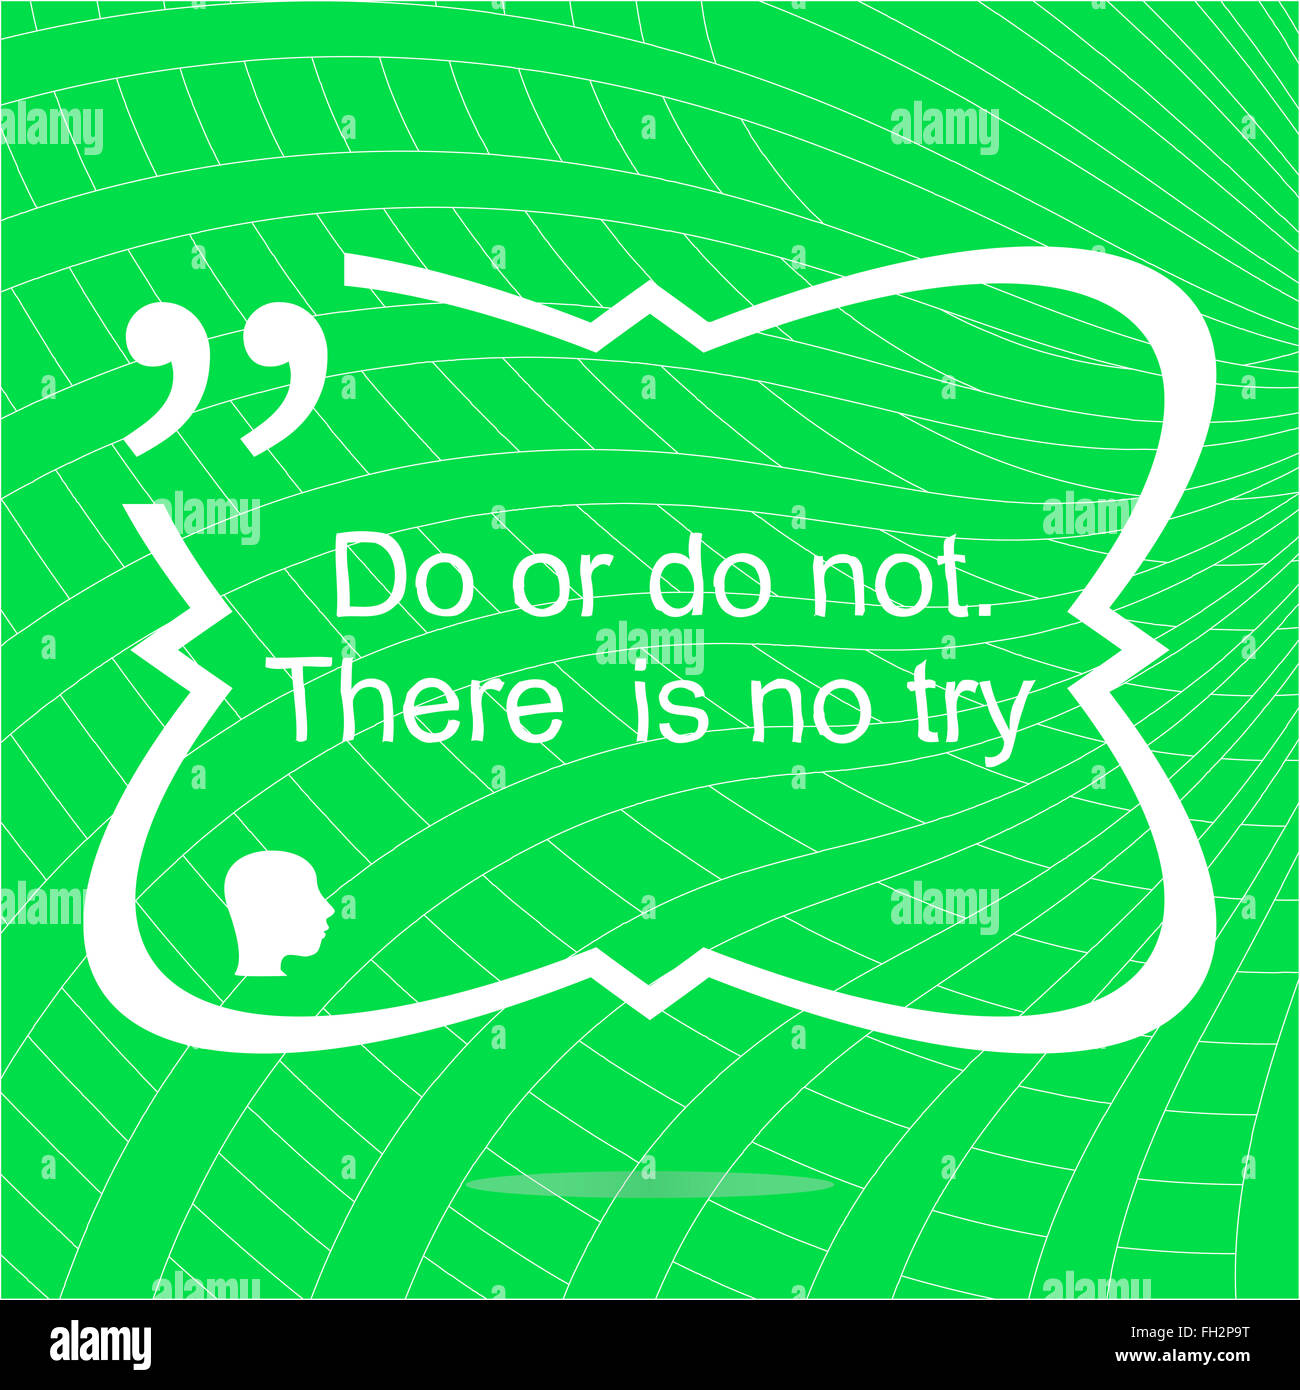 Do or do not. There is no try. Inspirational motivational quote. Simple trendy design. Positive quote Stock Photo